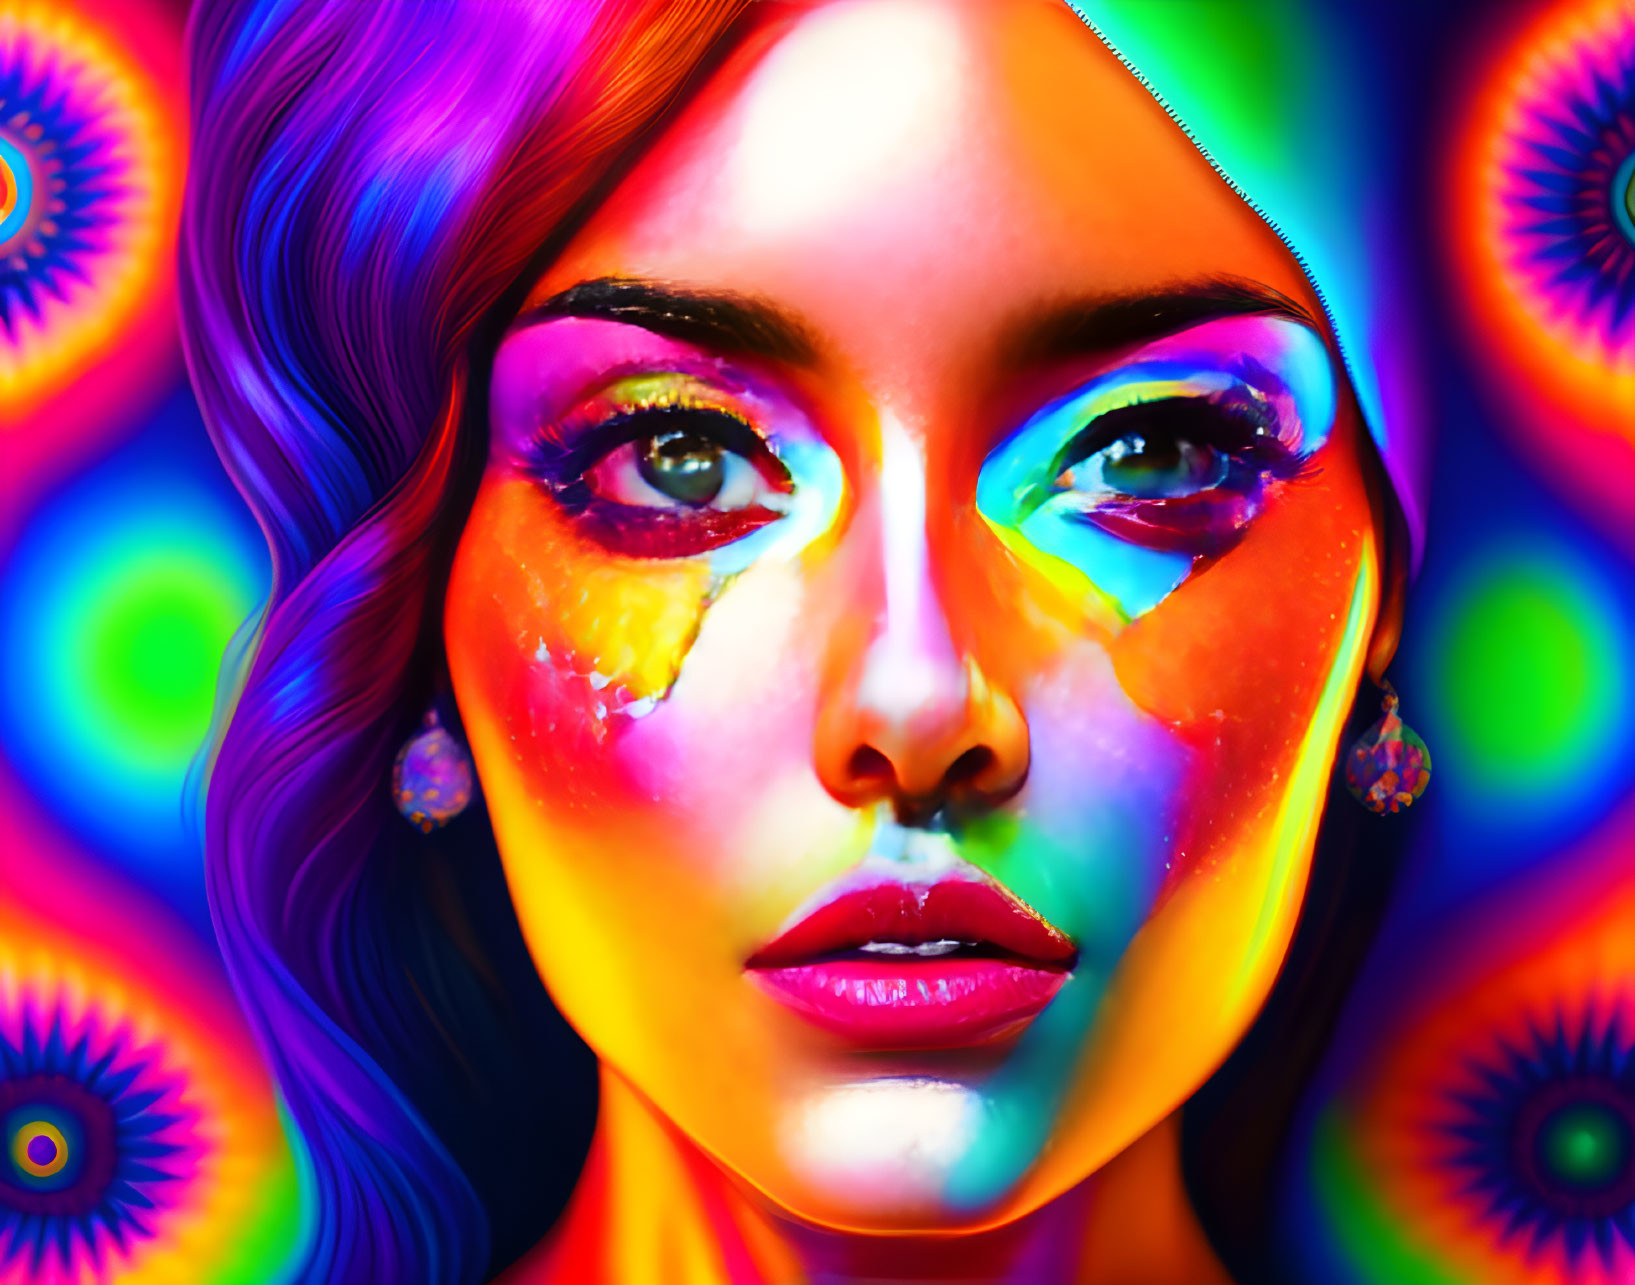 Colorful digital artwork: Woman with multi-colored skin tones on psychedelic background